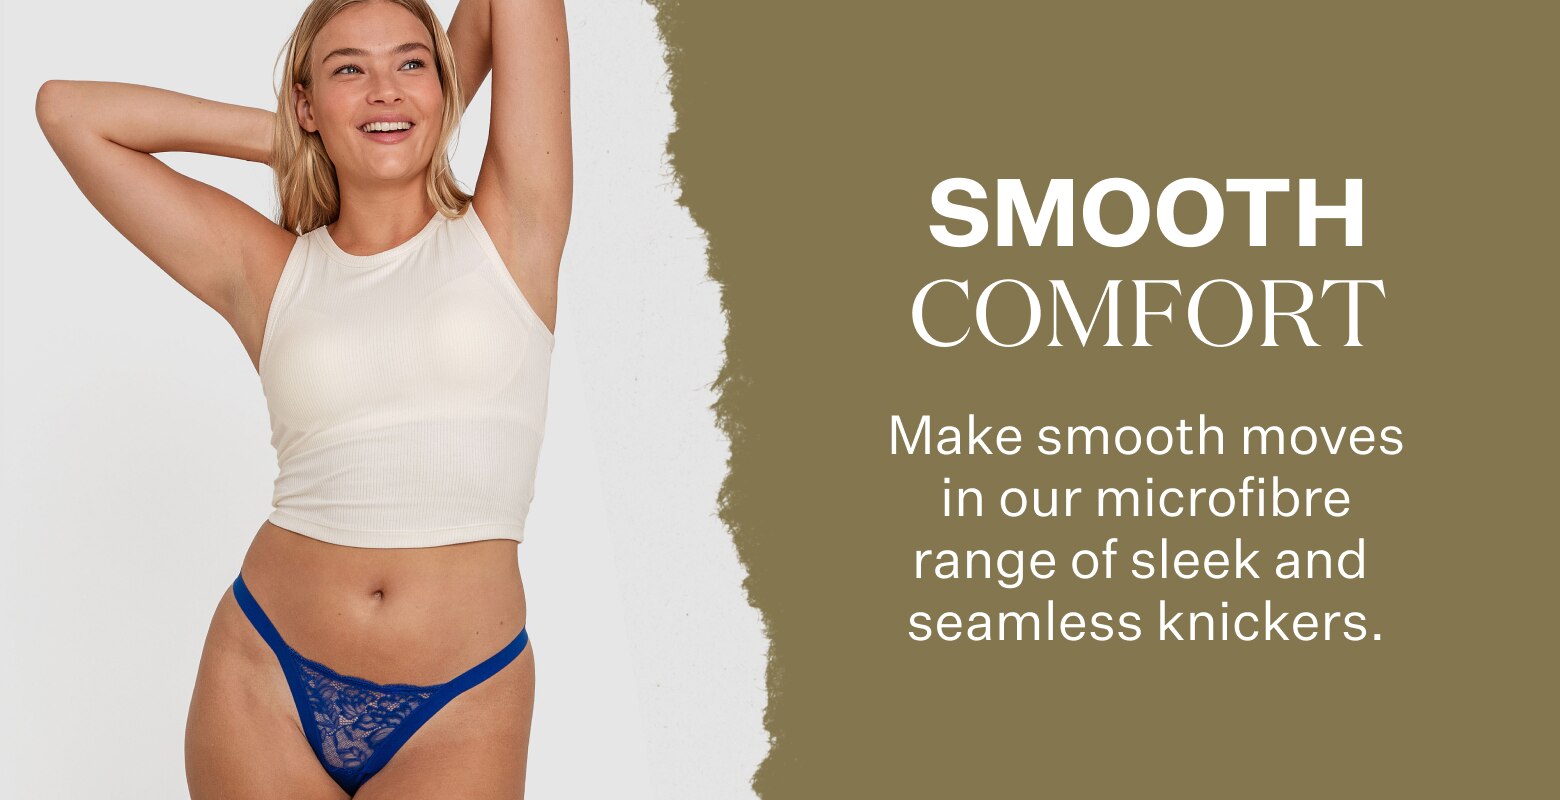 Smooth Comfort. Make smooth moves in our microfibre range of sleek and seamless knickers.